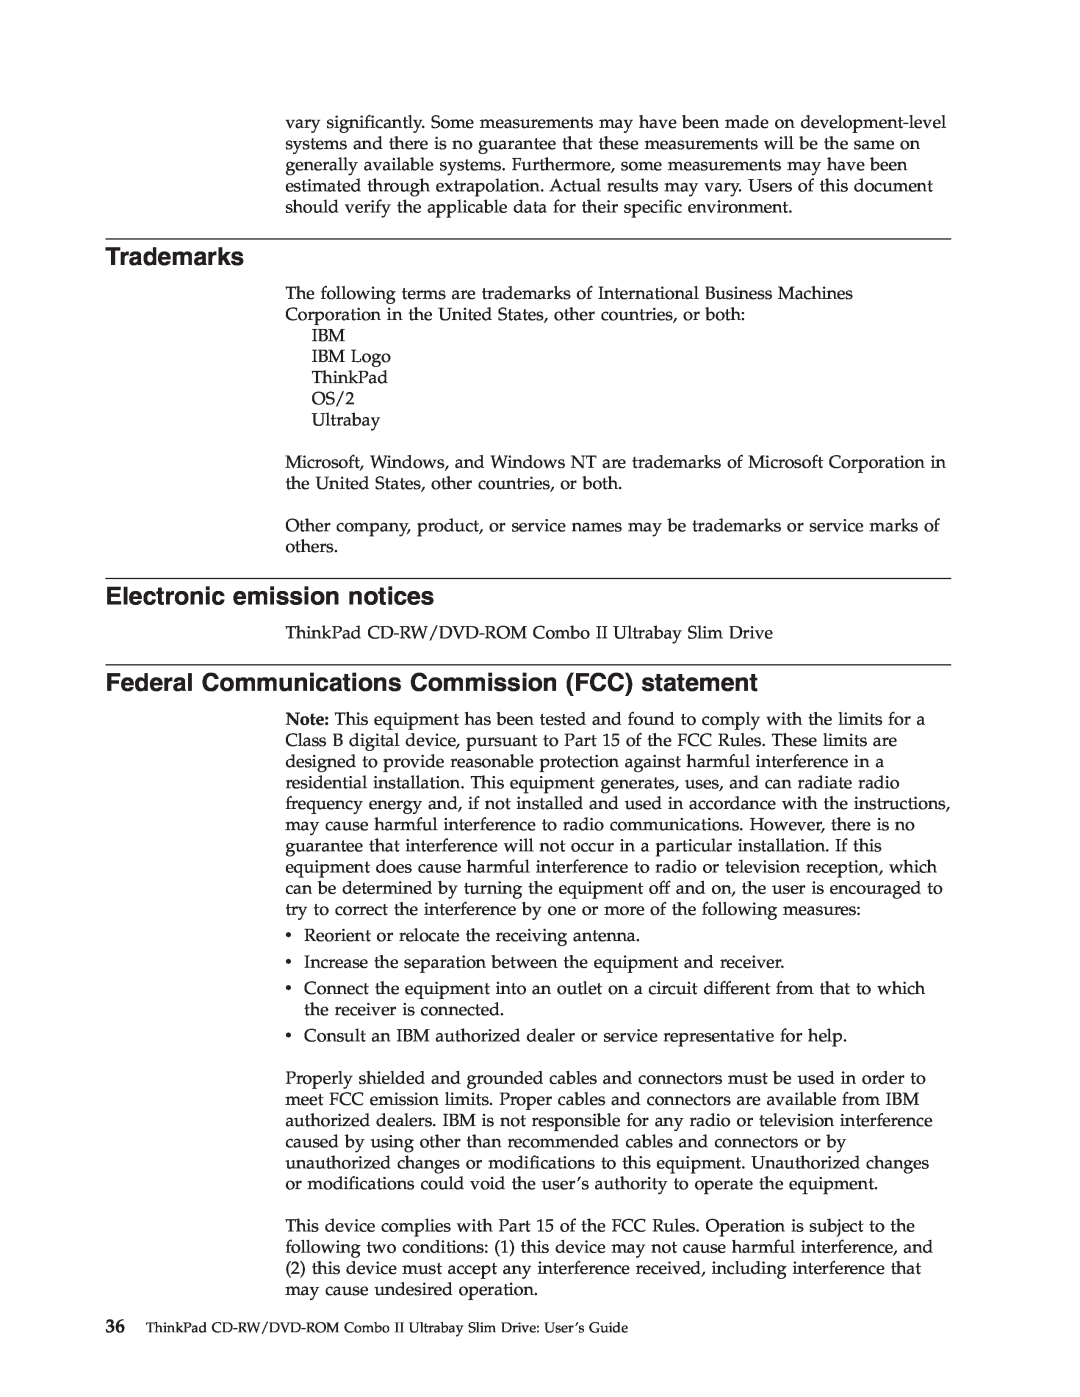 IBM 73P3292 manual Trademarks, Electronic emission notices, Federal Communications Commission FCC statement 